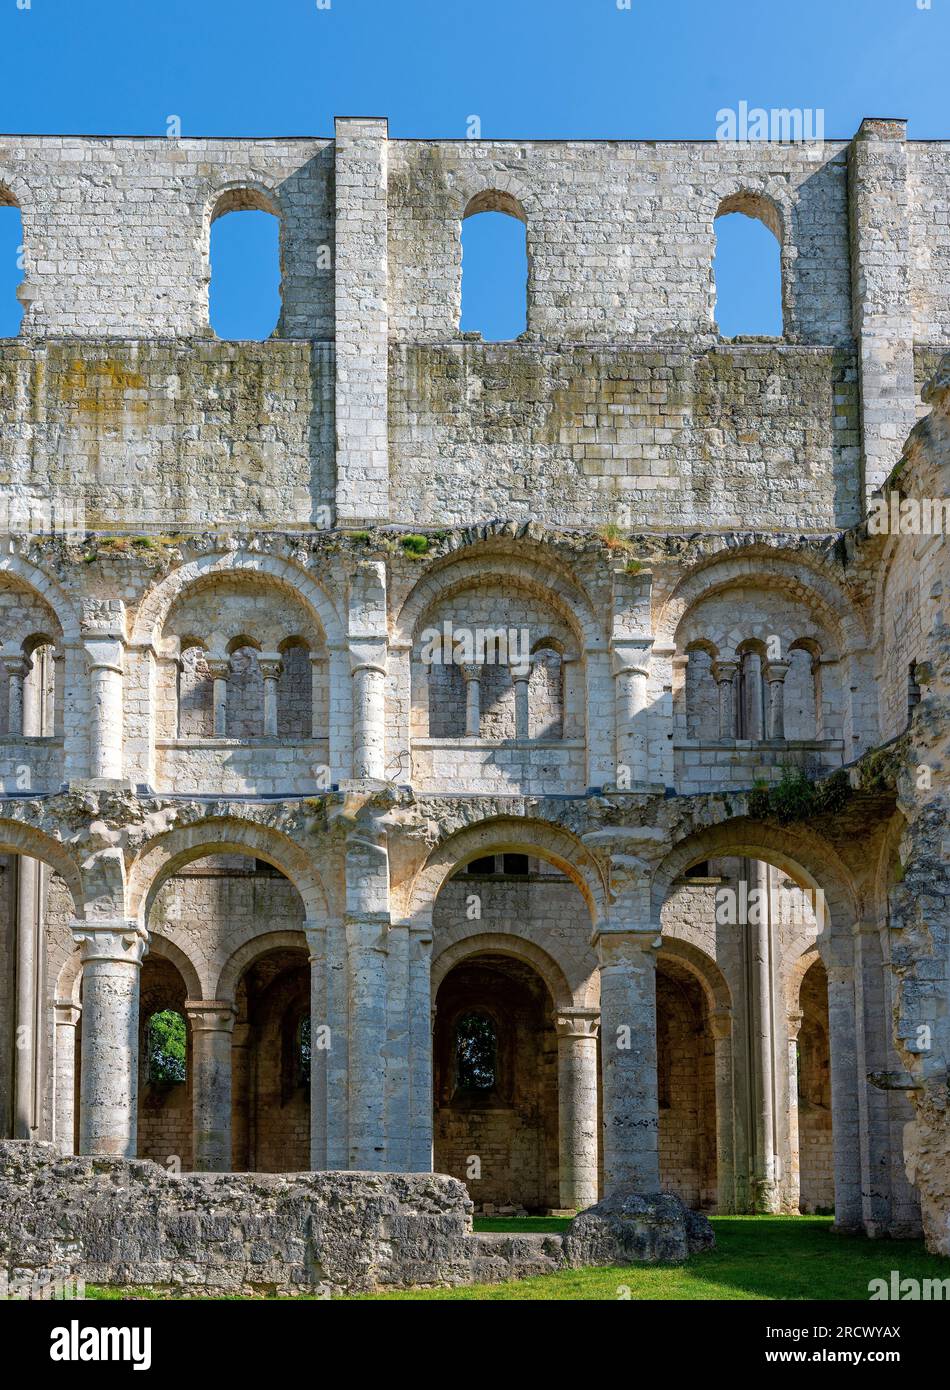 part of the ruins of the former Benedictine abbey Jumieges  in the Normandy, France Stock Photo